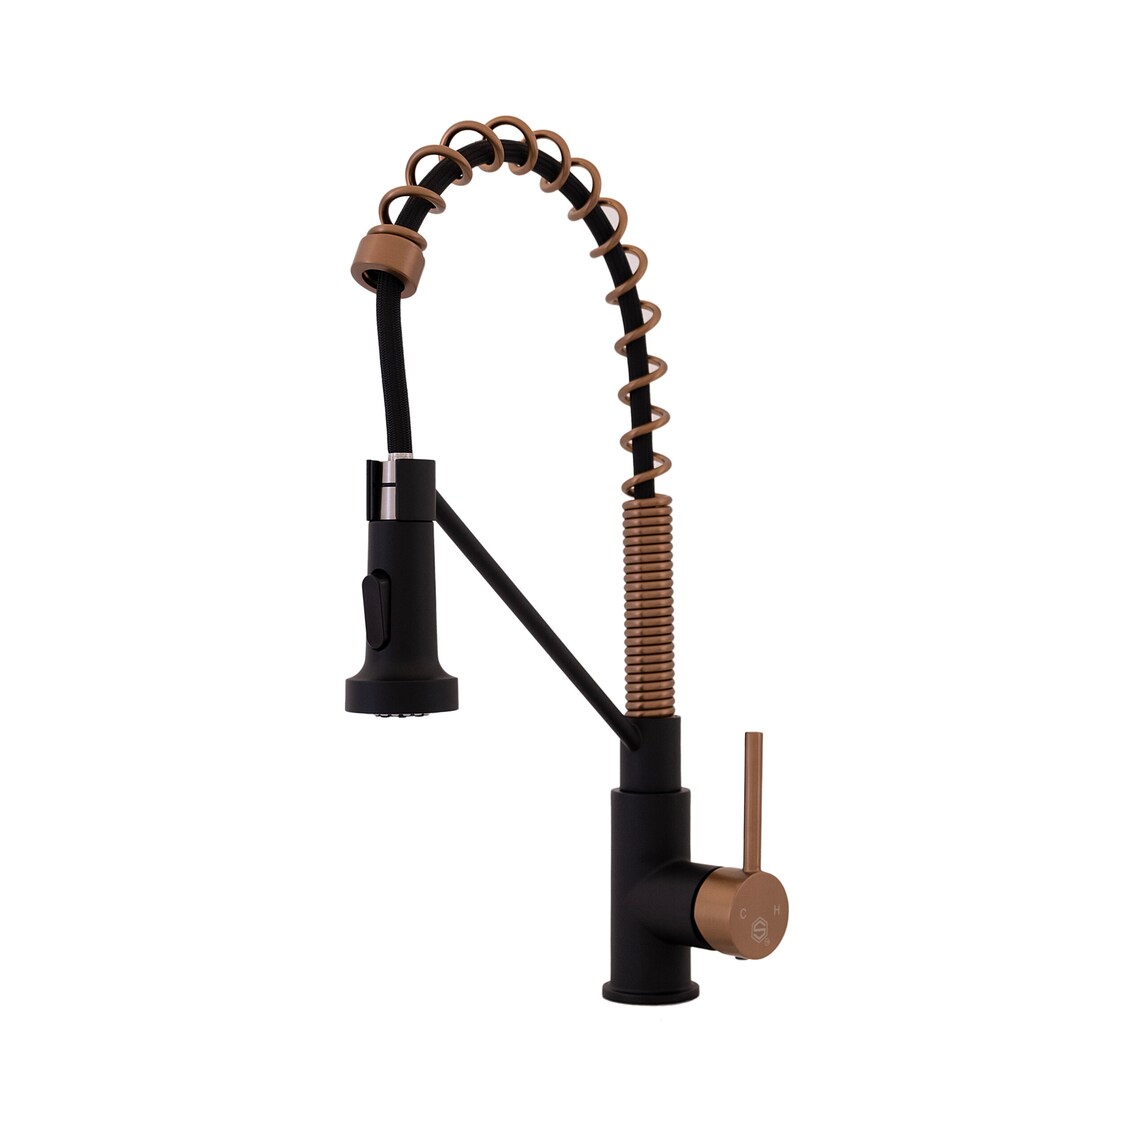 Matte Black and Brushed Copper Single-handle Pull-down Kitchen Faucet ...